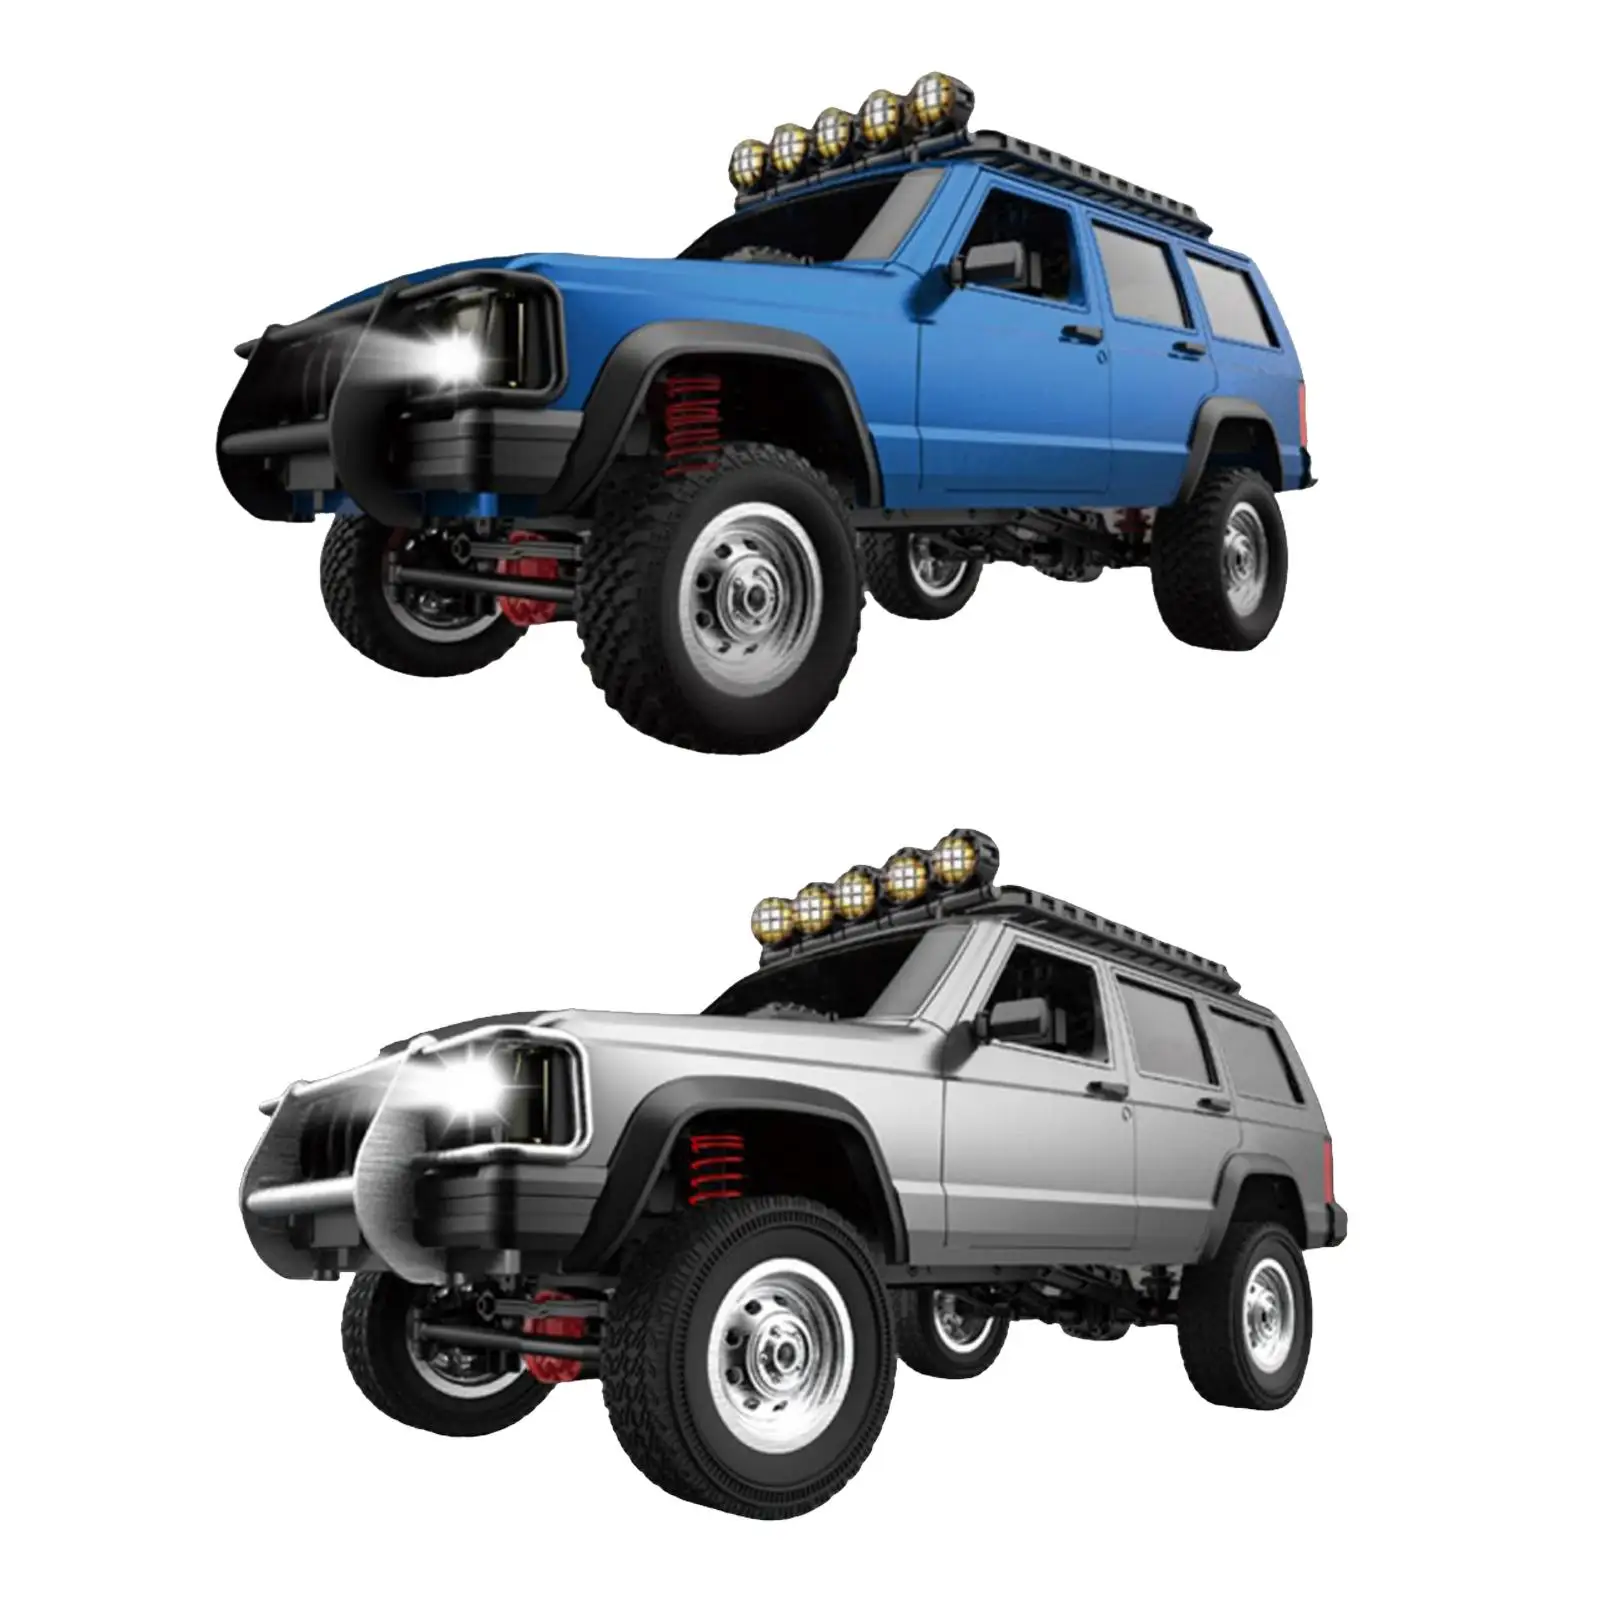 Huge 1:12 RC Car Rechargeable Battery LED Headlight 2.4G Off Road Trucks Pickup All Terrain Toy for Gifts Adult Kids Children